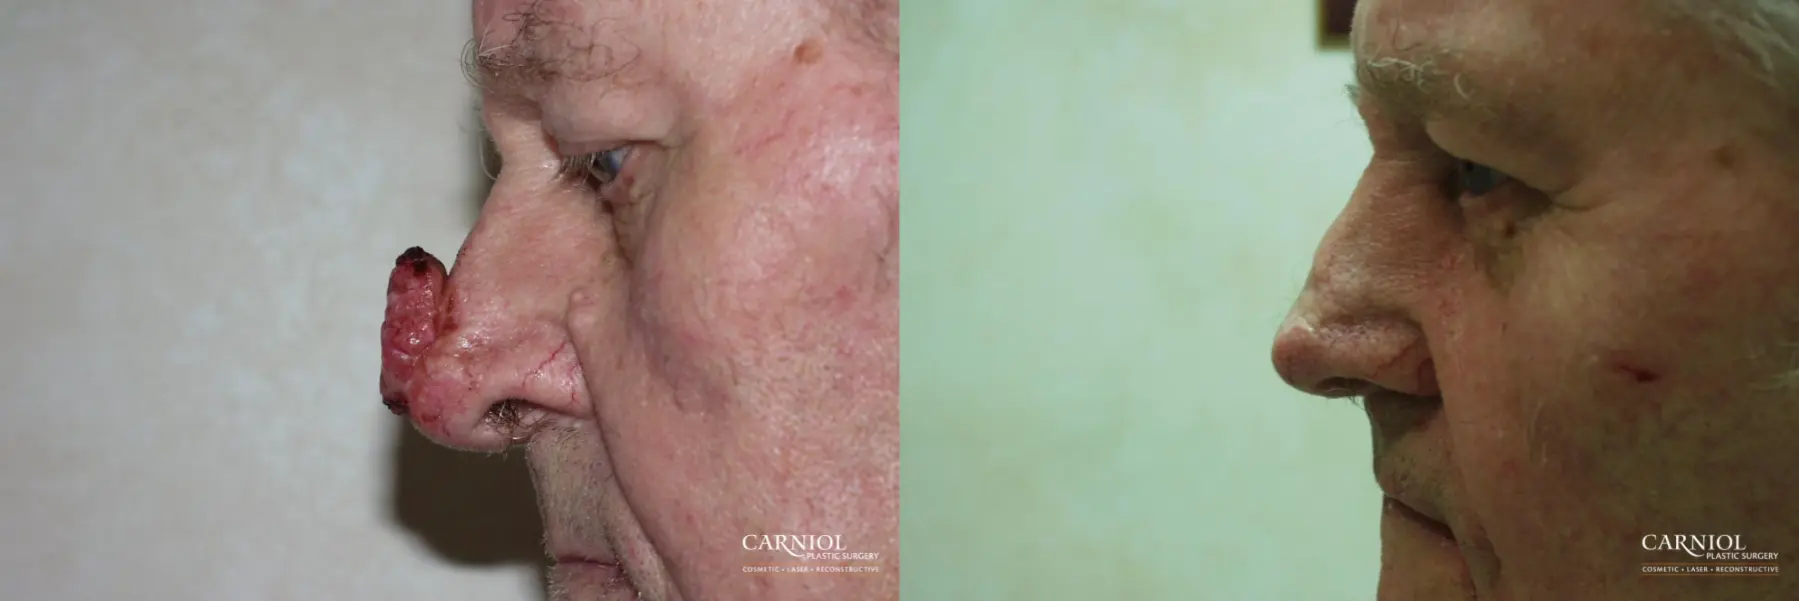 Skin Cancer Reconstruction - Face: Patient 8 - Before and After 1